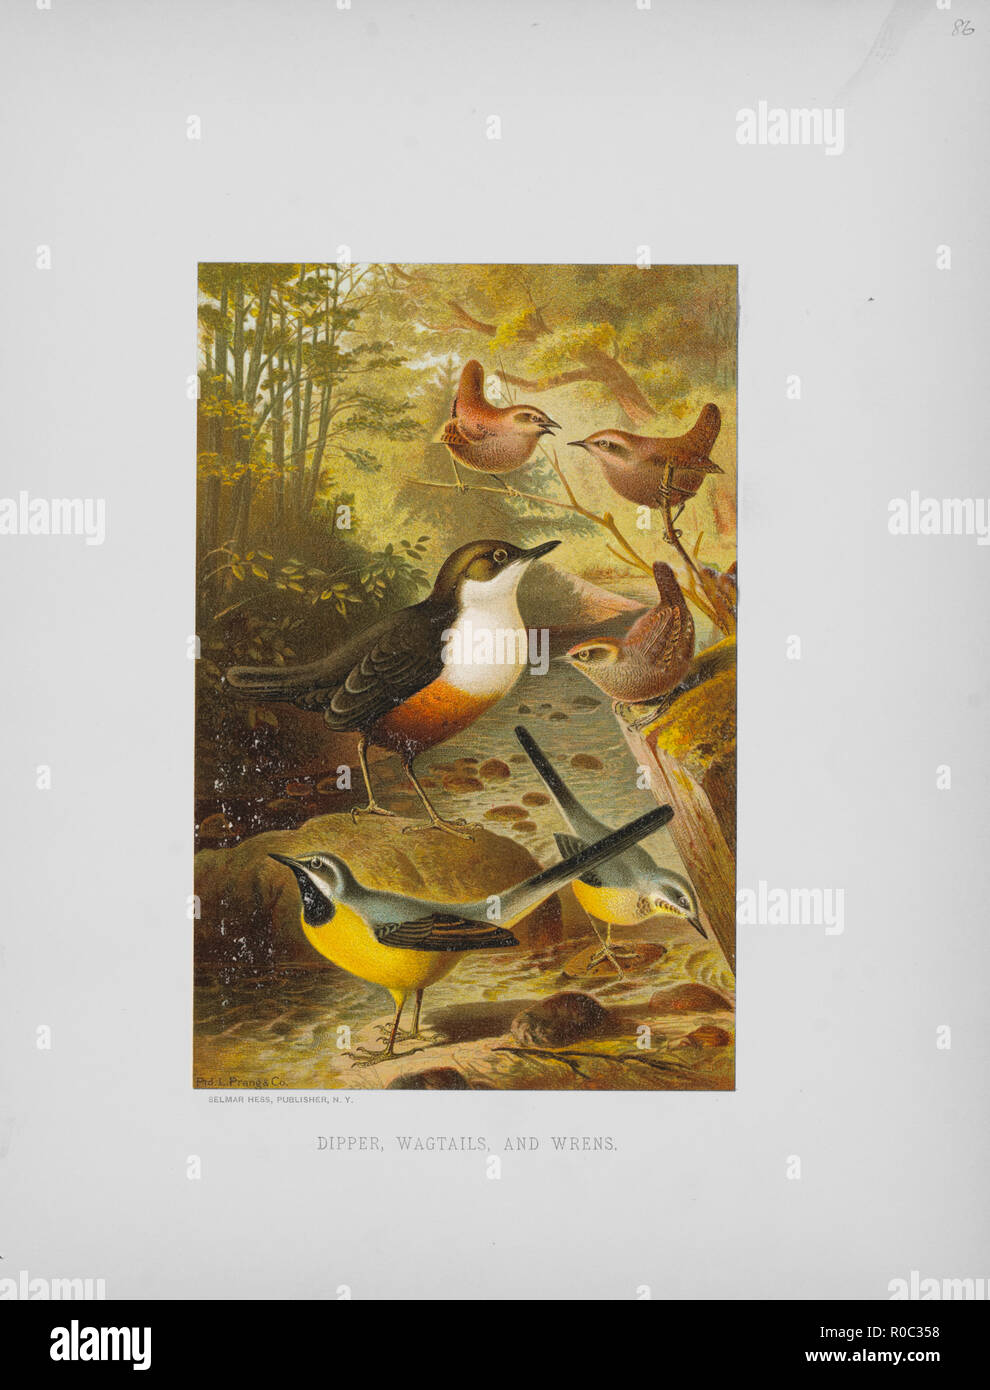 Dipper, Wagtails, and Wrens, Selmar Press Publisher, NY, 1898 Stock Photo